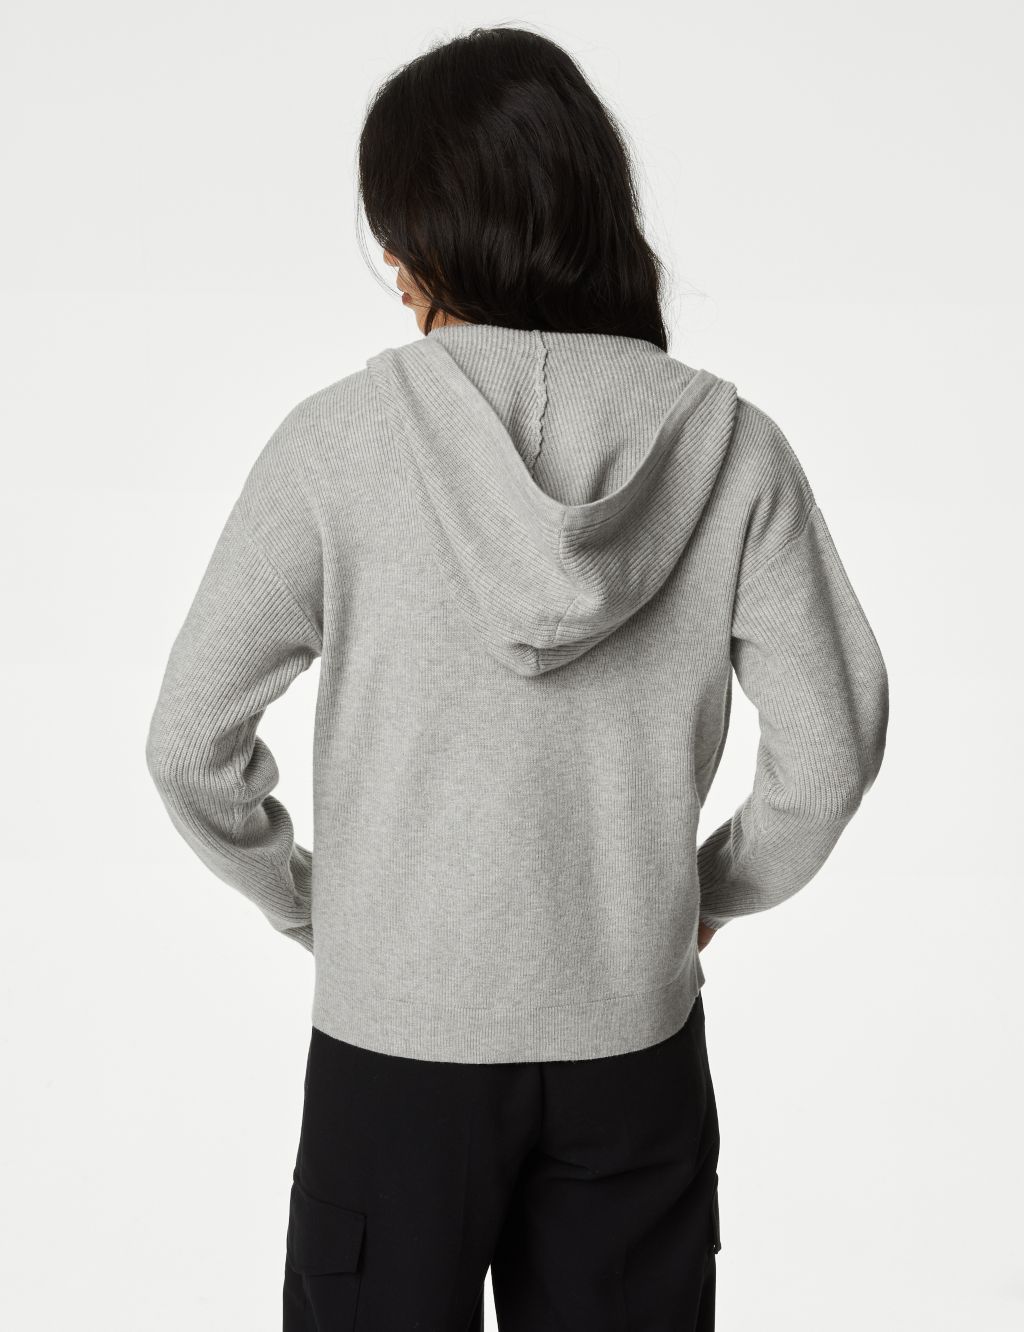 Soft Touch Zip Up Hoodie image 5